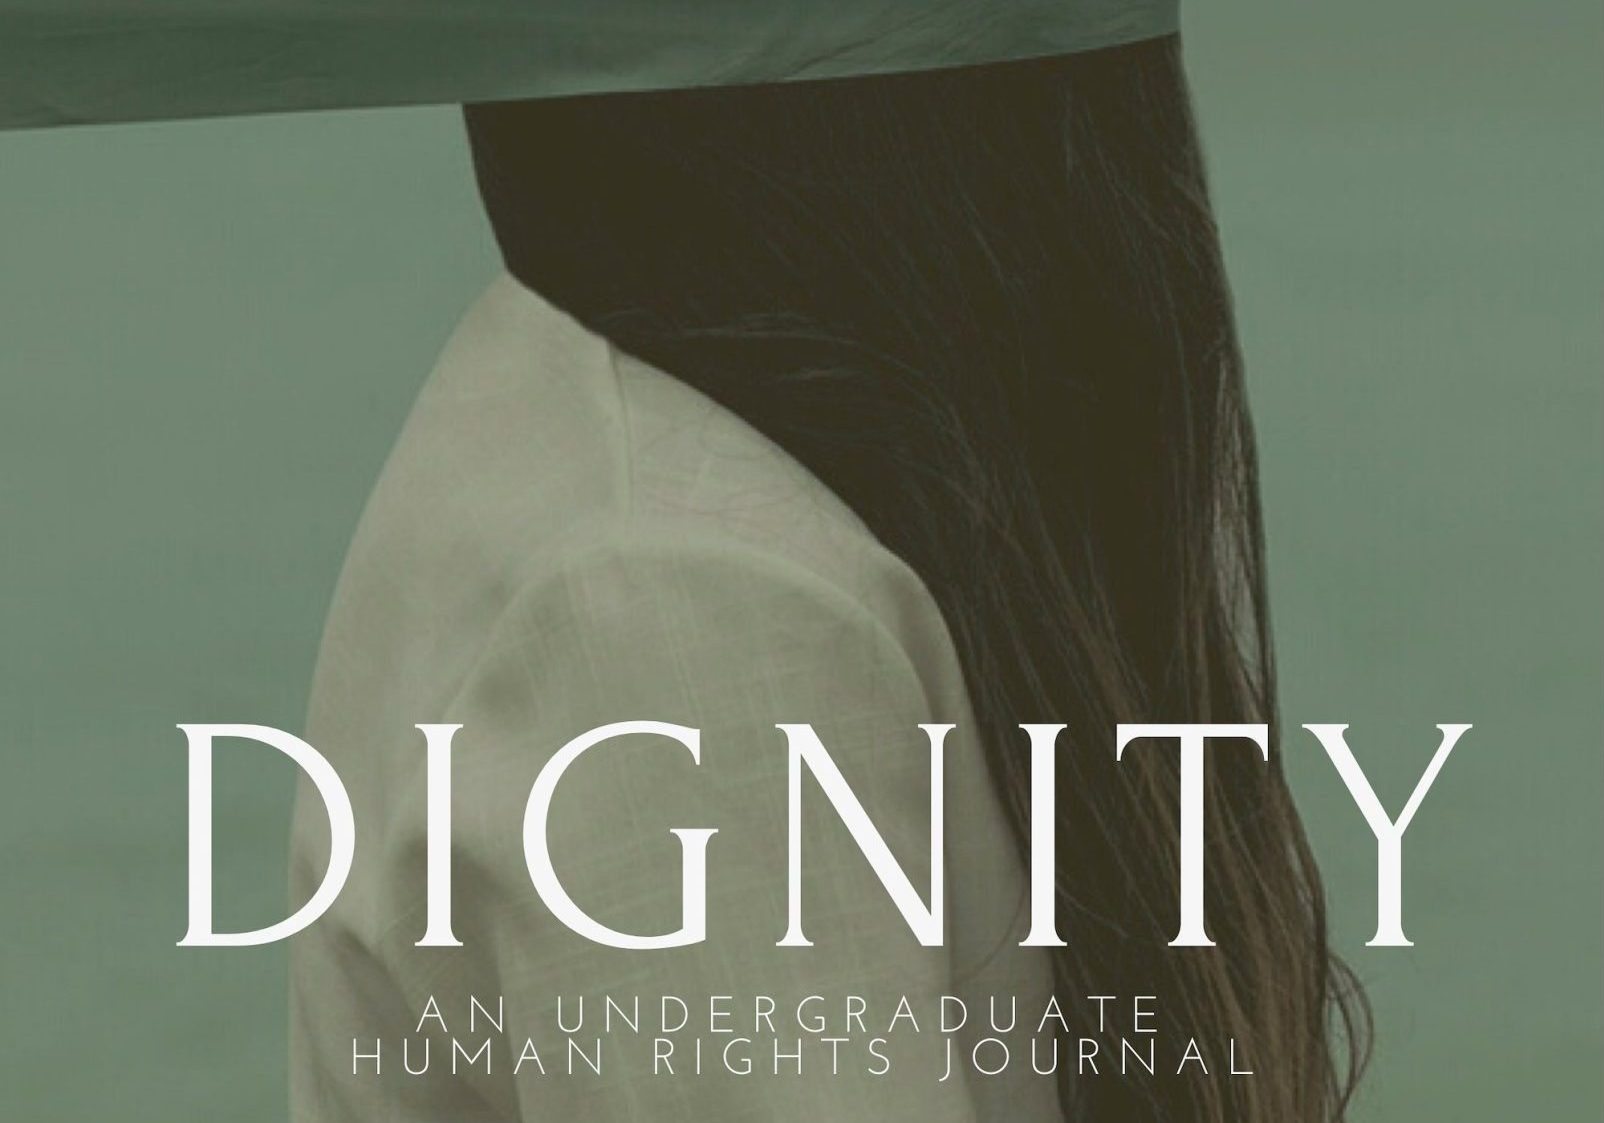 Dignity Human rights journal volume 1 cover